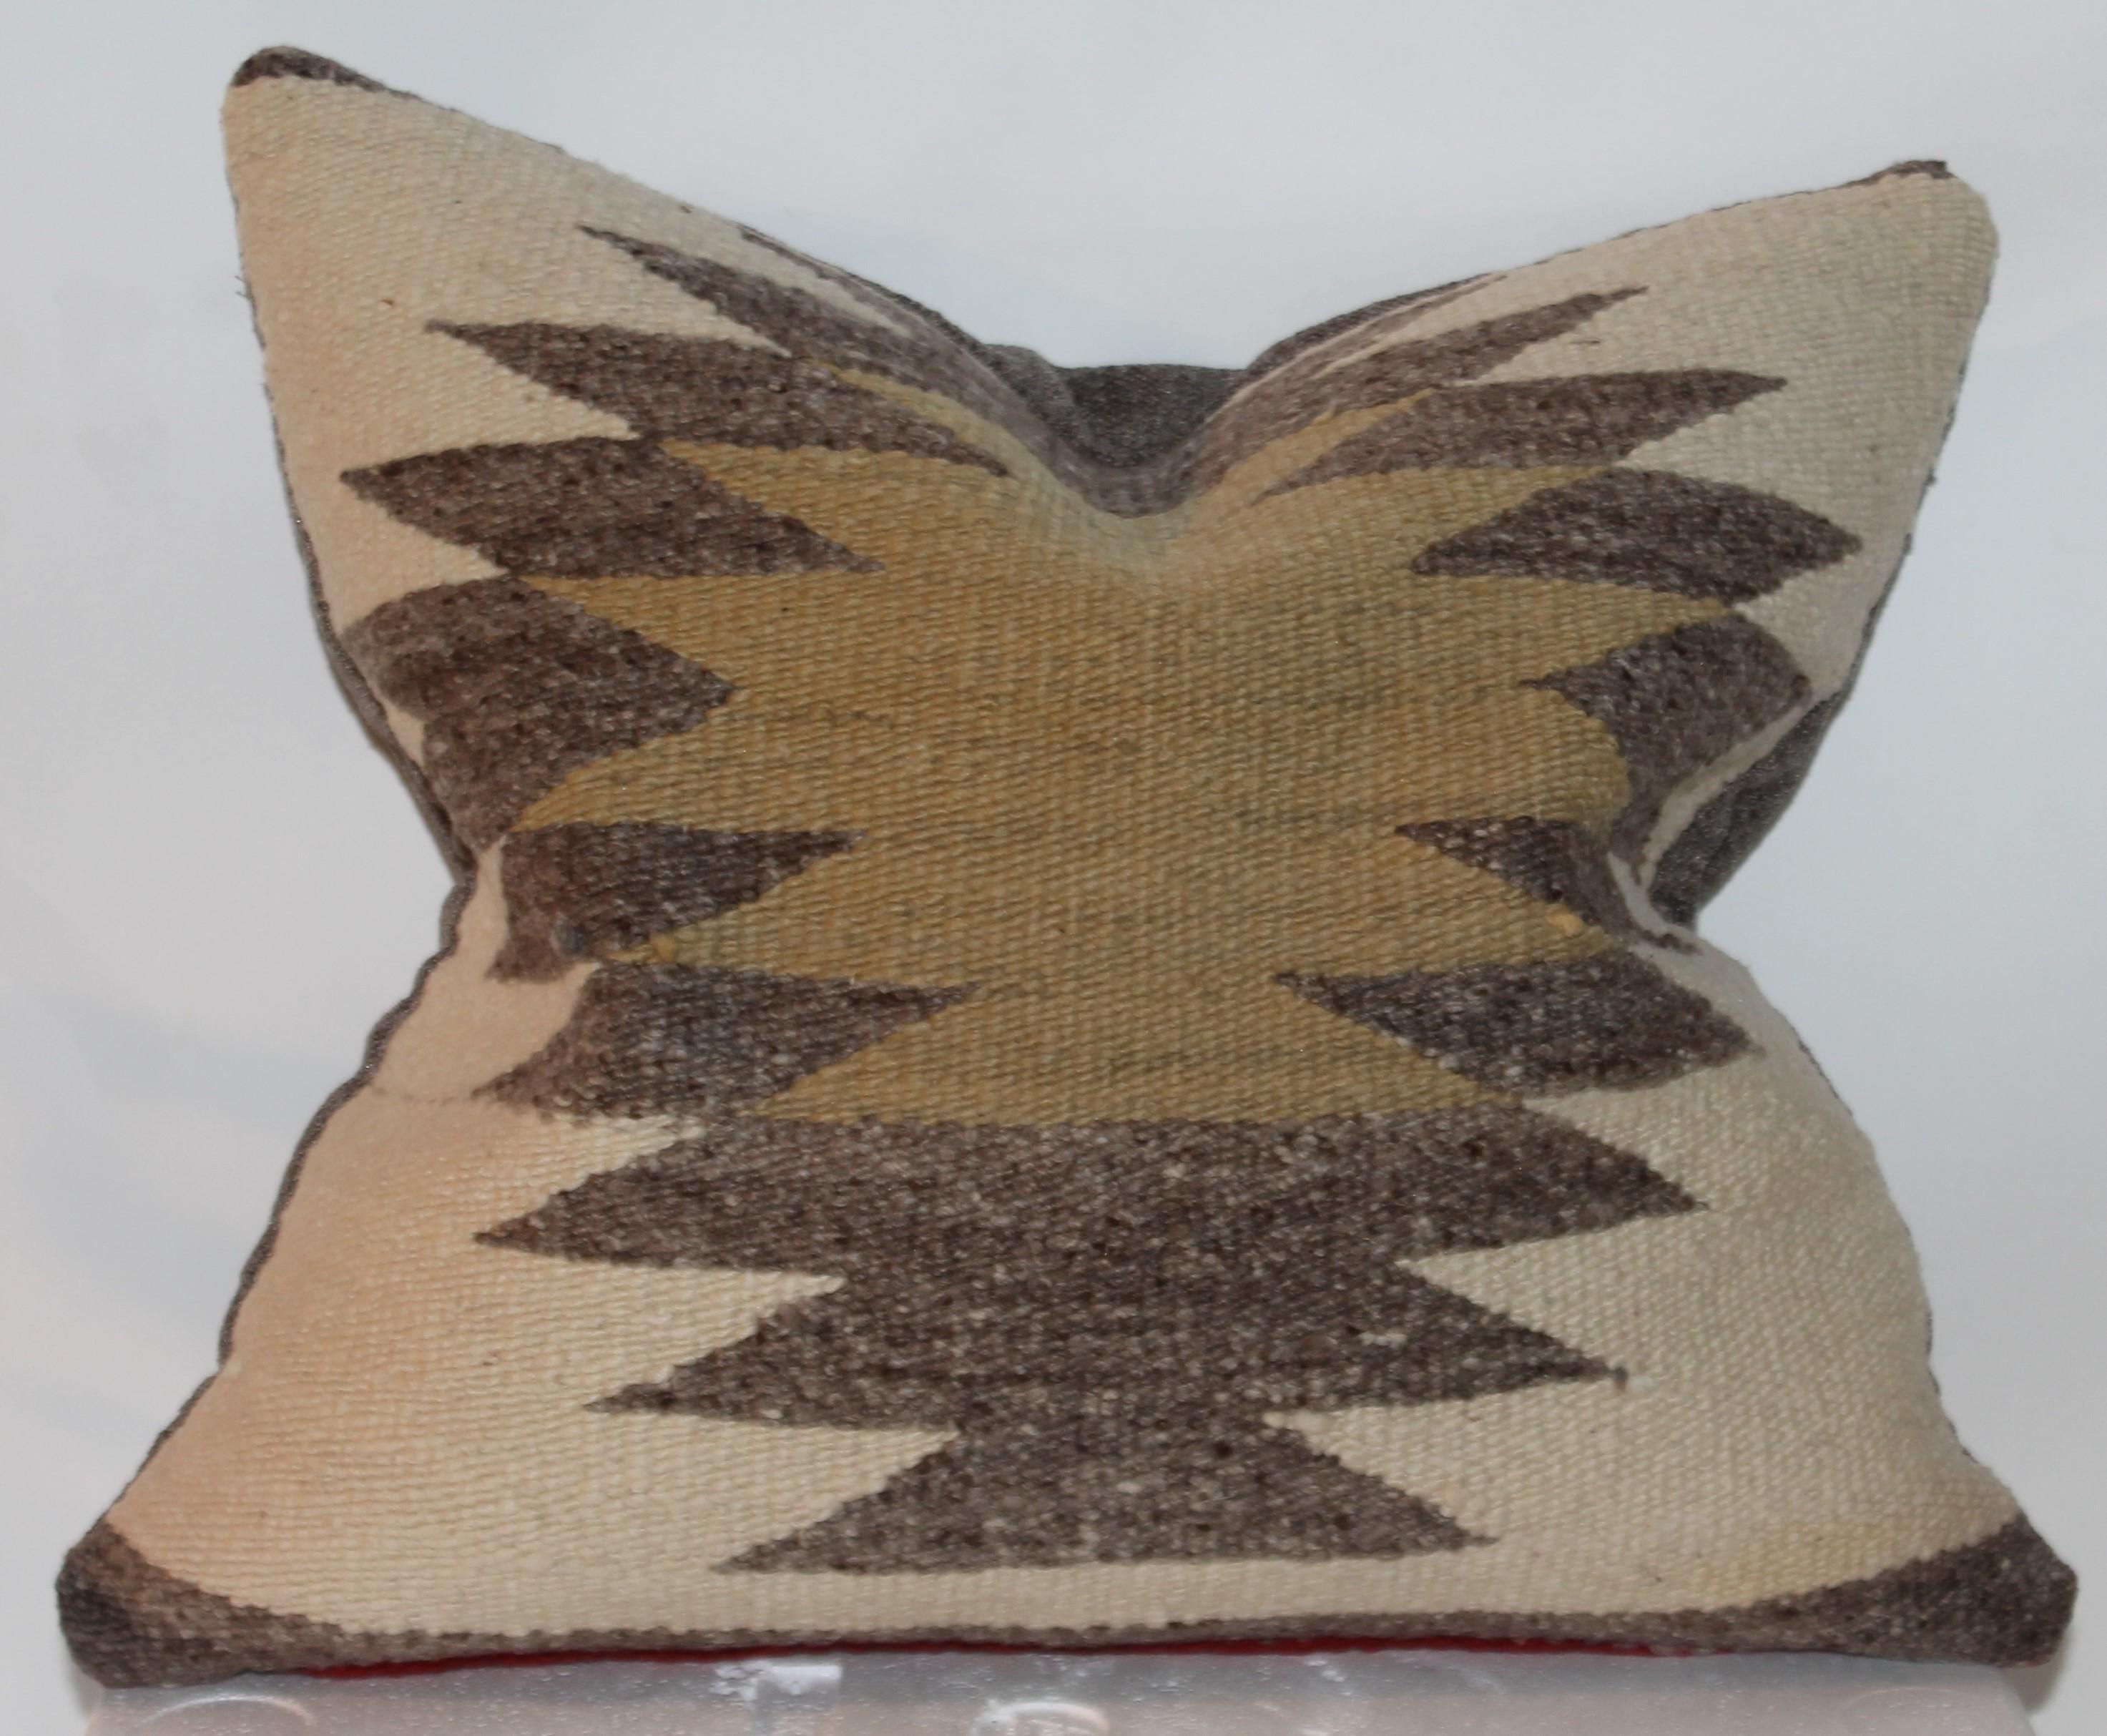 This fine eye dazzler pair of Navajo Indian weaving pillows. One is a bit larger then the other. Sold as a pair.
Measures: large pillow - 16 H x 18 W
Medium pillow - 14.5 H x 18 W.